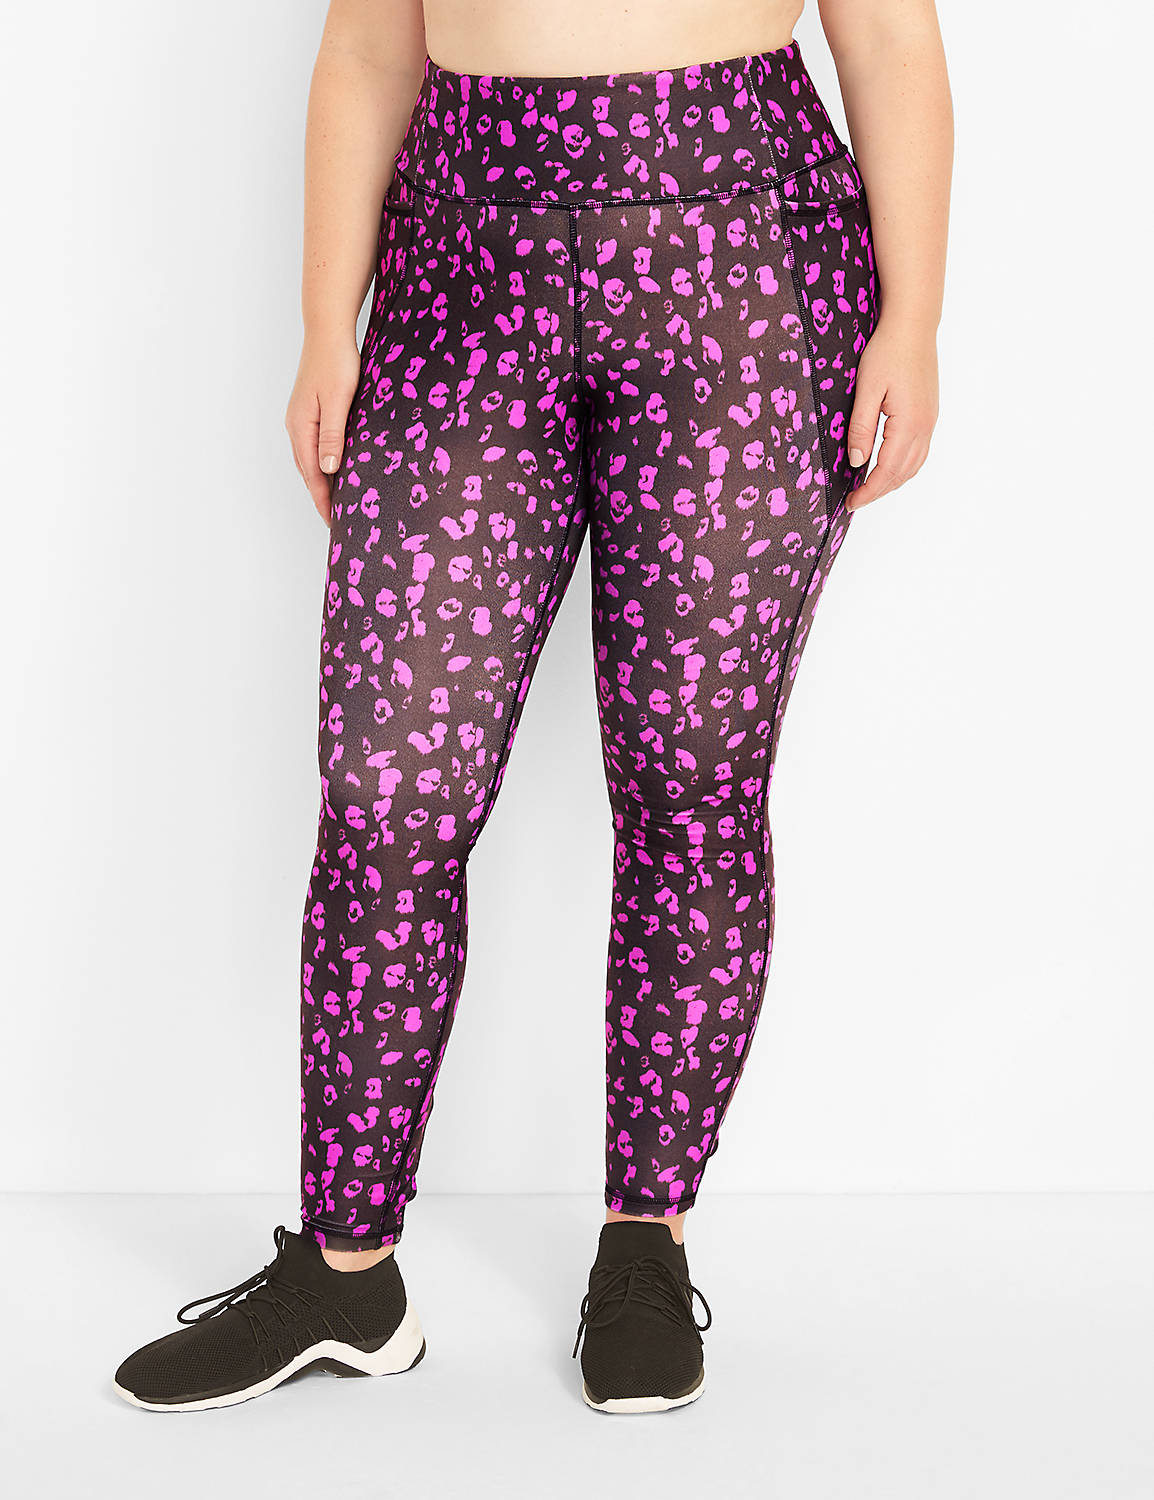 LIVI High Rise Wicking 7/8 Legging Strappy Hem Detail S 1124195:LBH21094_FloralRushSmall_V2_CW2:22/24 Product Image 1